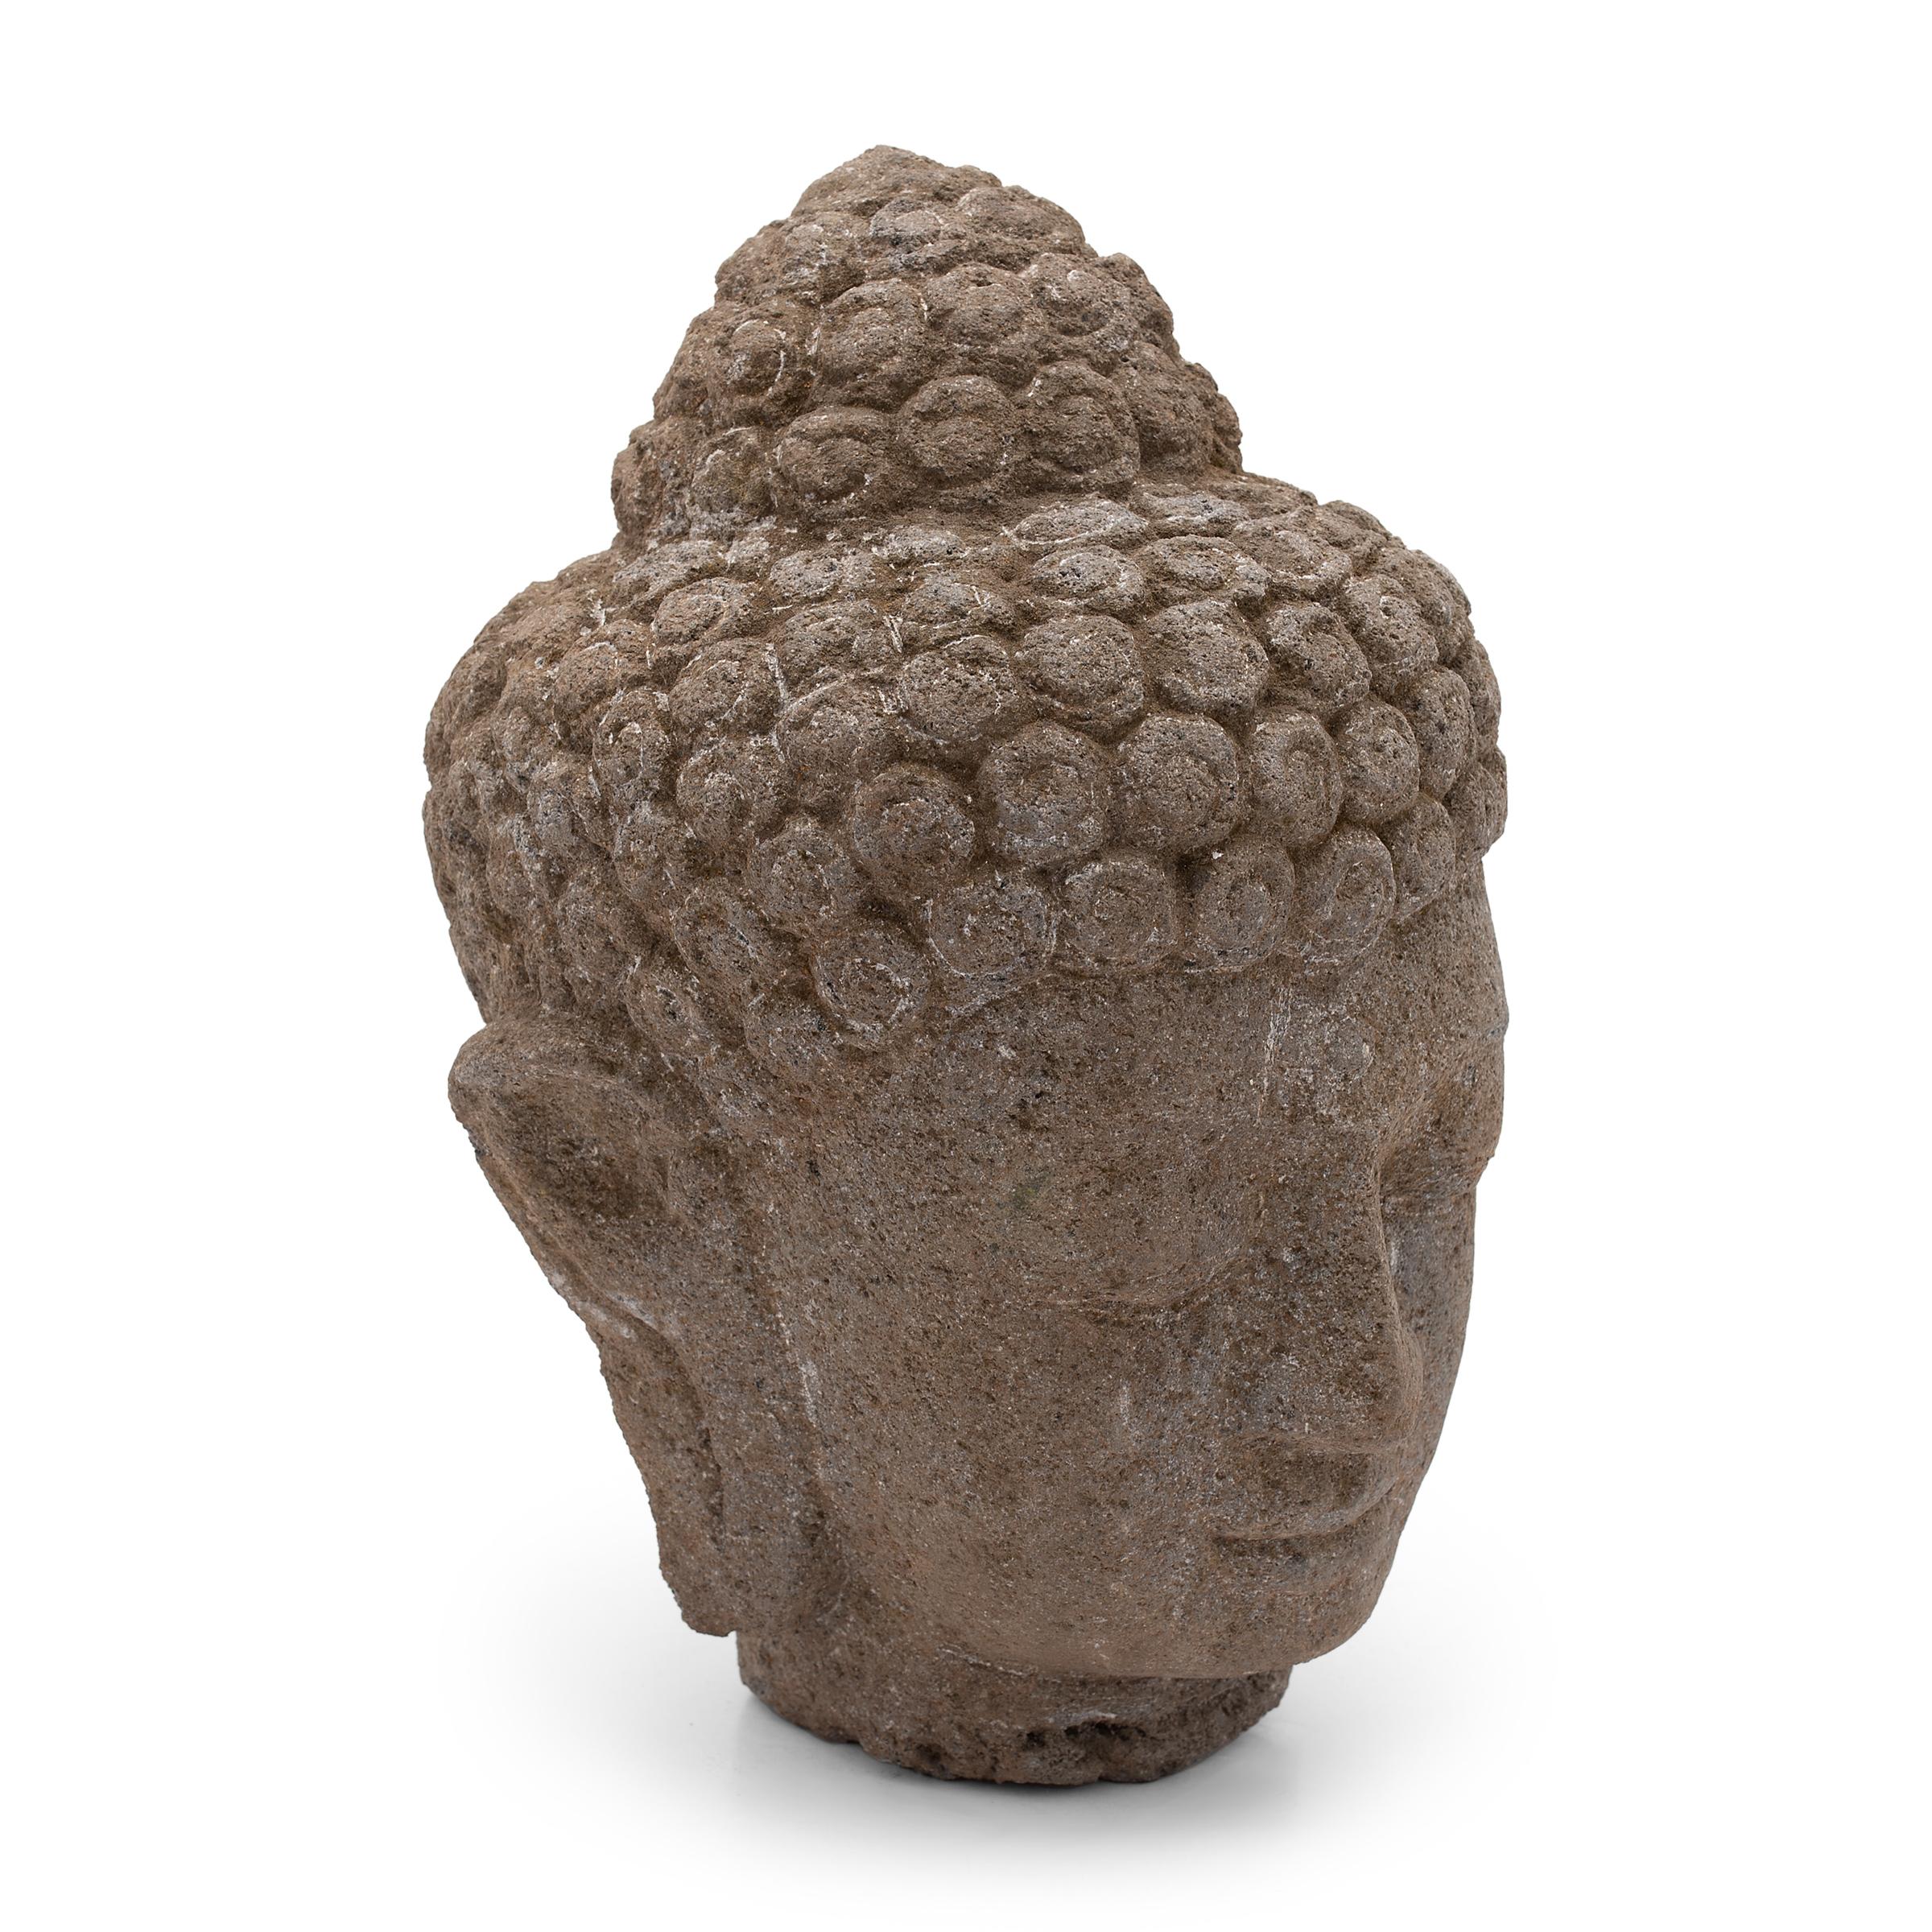 With closed eyes and a gentle expression, this large stone head depicts the Shakyamuni Buddha in calm meditation. Also known as Shaka, Gautama Buddha, or Prince Siddhartha, the historic Buddha Shakyamuni embodies virtues of wisdom and compassion and